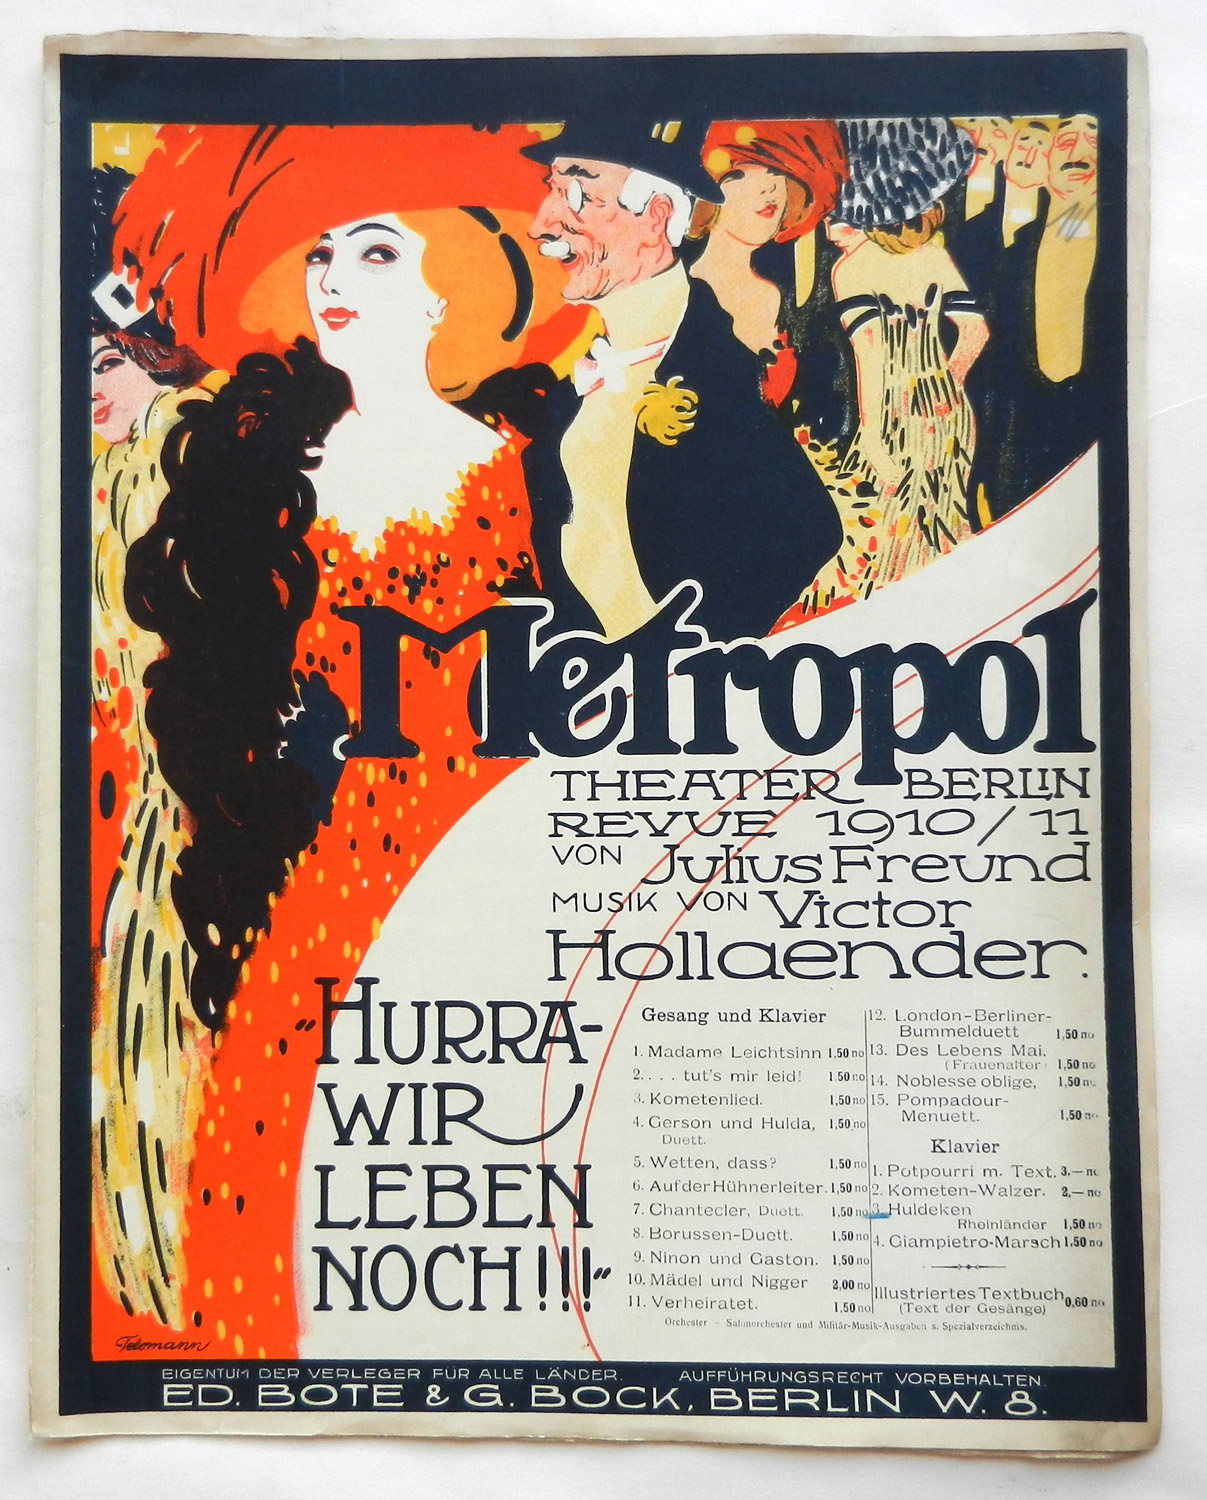 Sheet music cover for "Hurra, wie leben noch!!!" from a Victor Hollaender Metropol-Theater revue. (Photo: Bote & Bock)